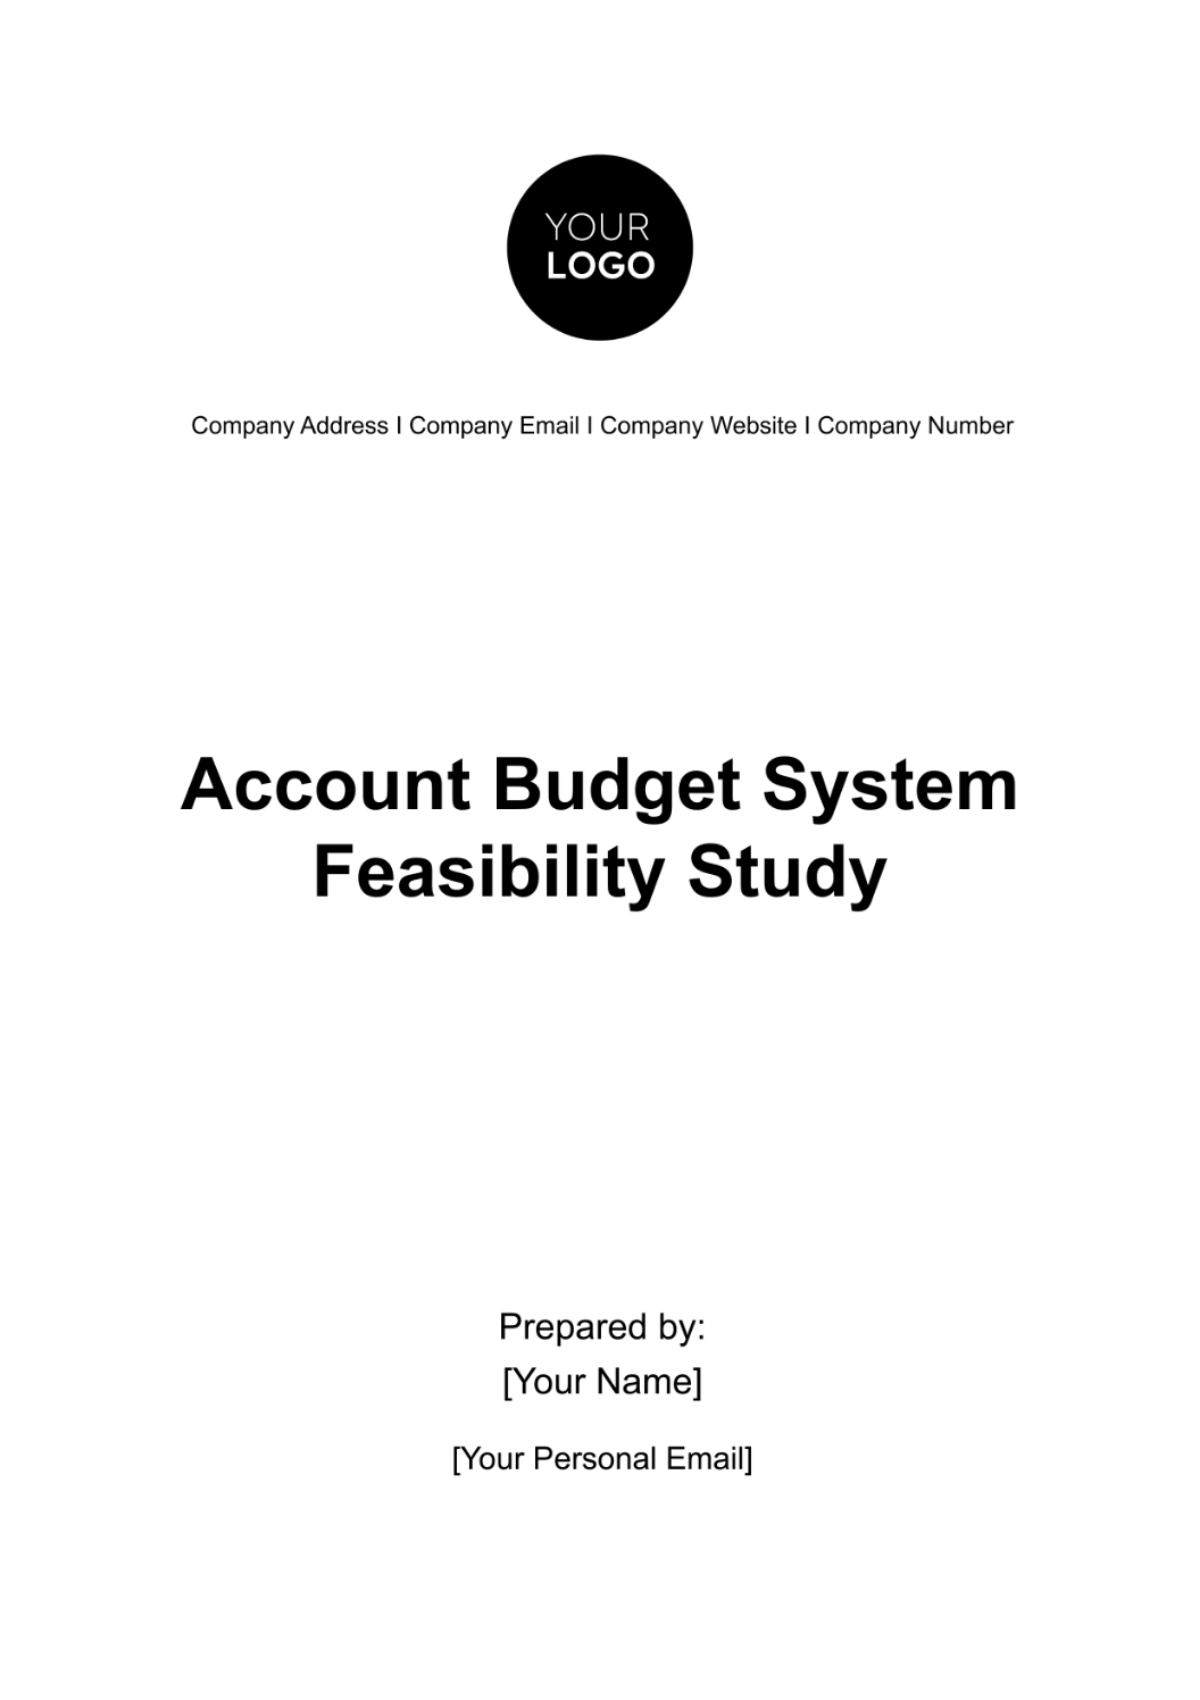 Account Budget System Feasibility Study Template